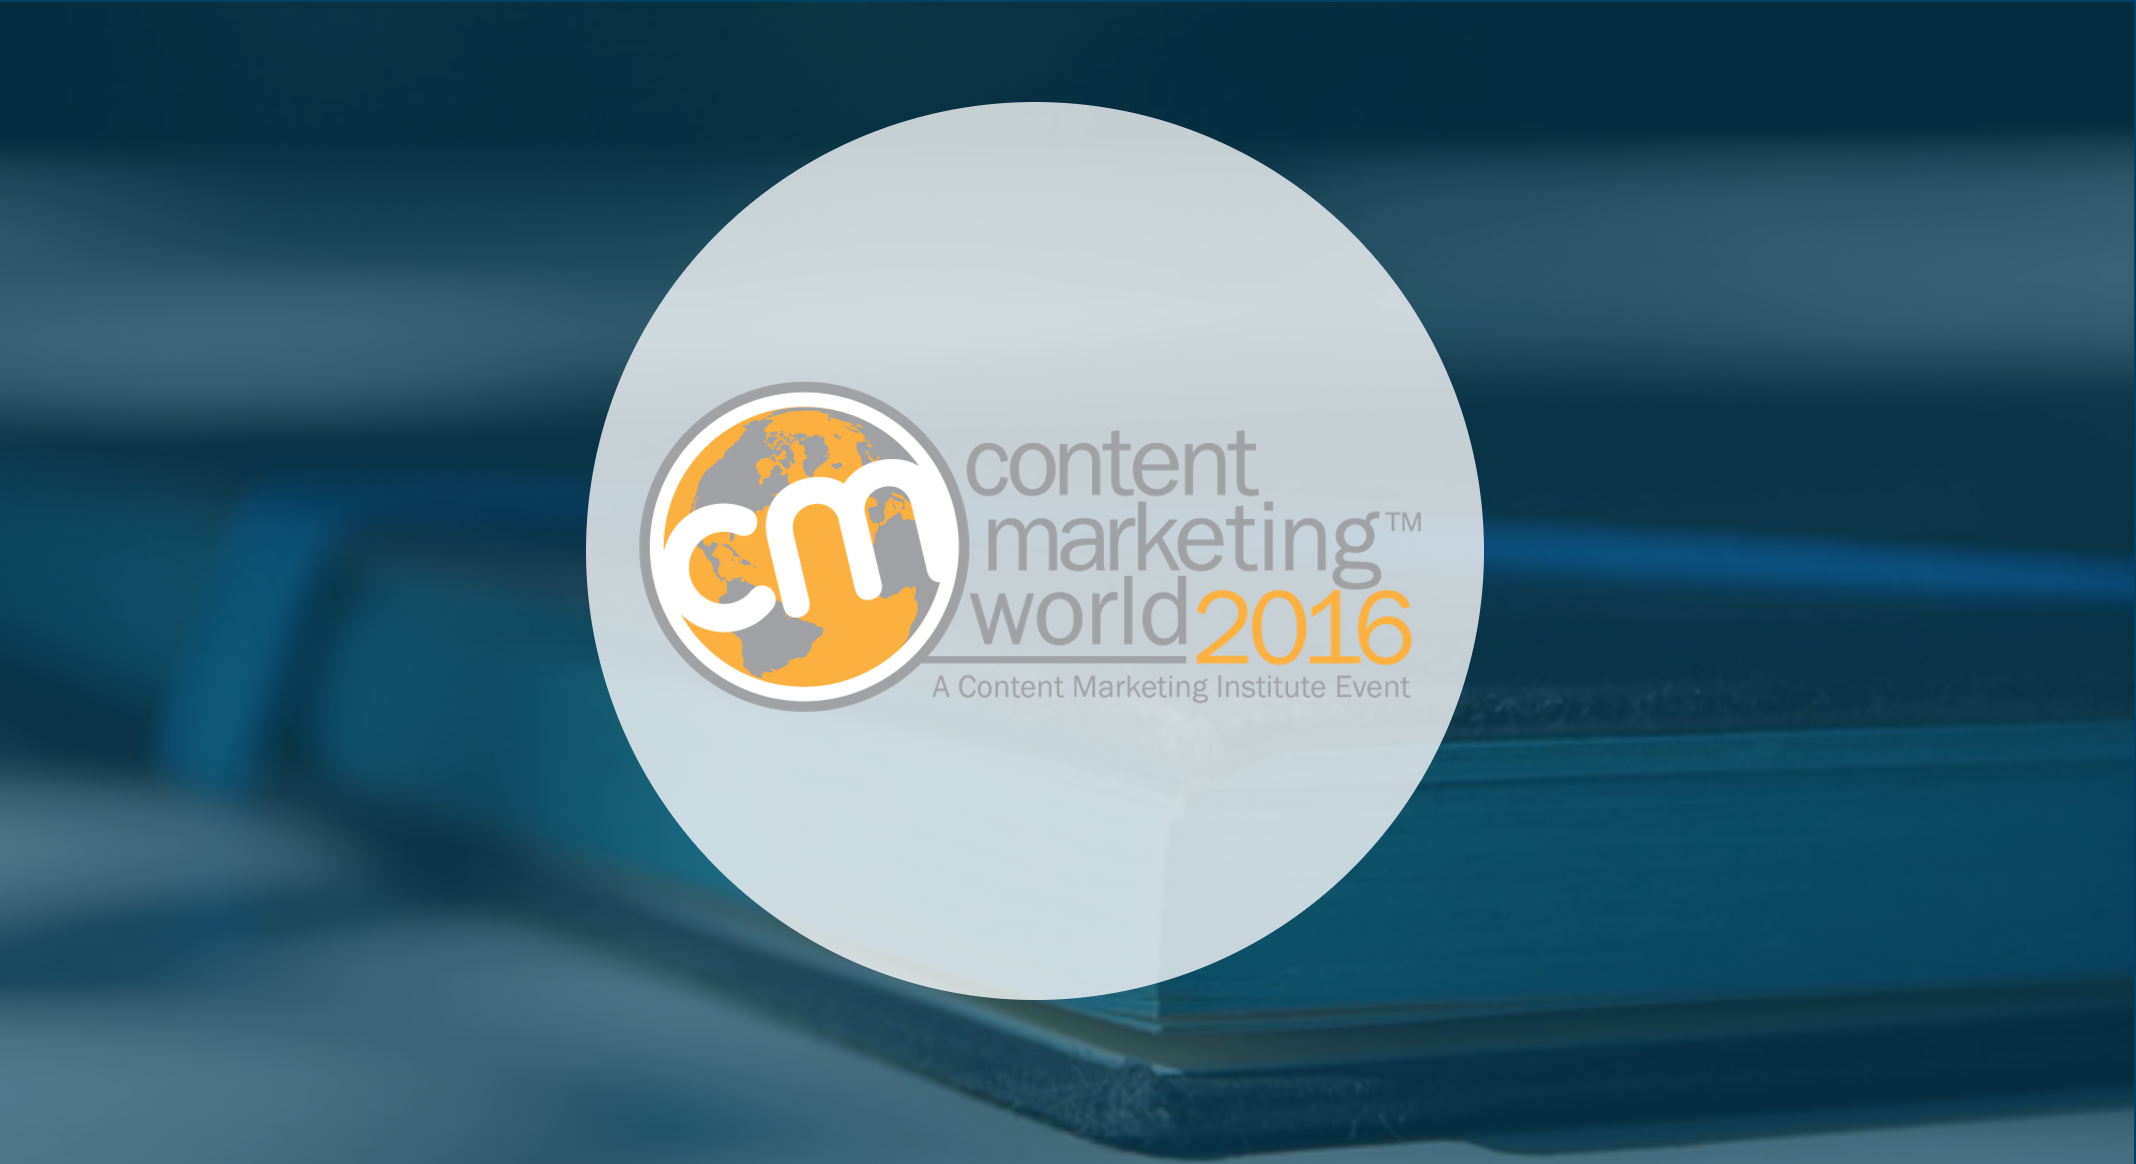 Content Marketing World Explores How to Make Great Content & Get it